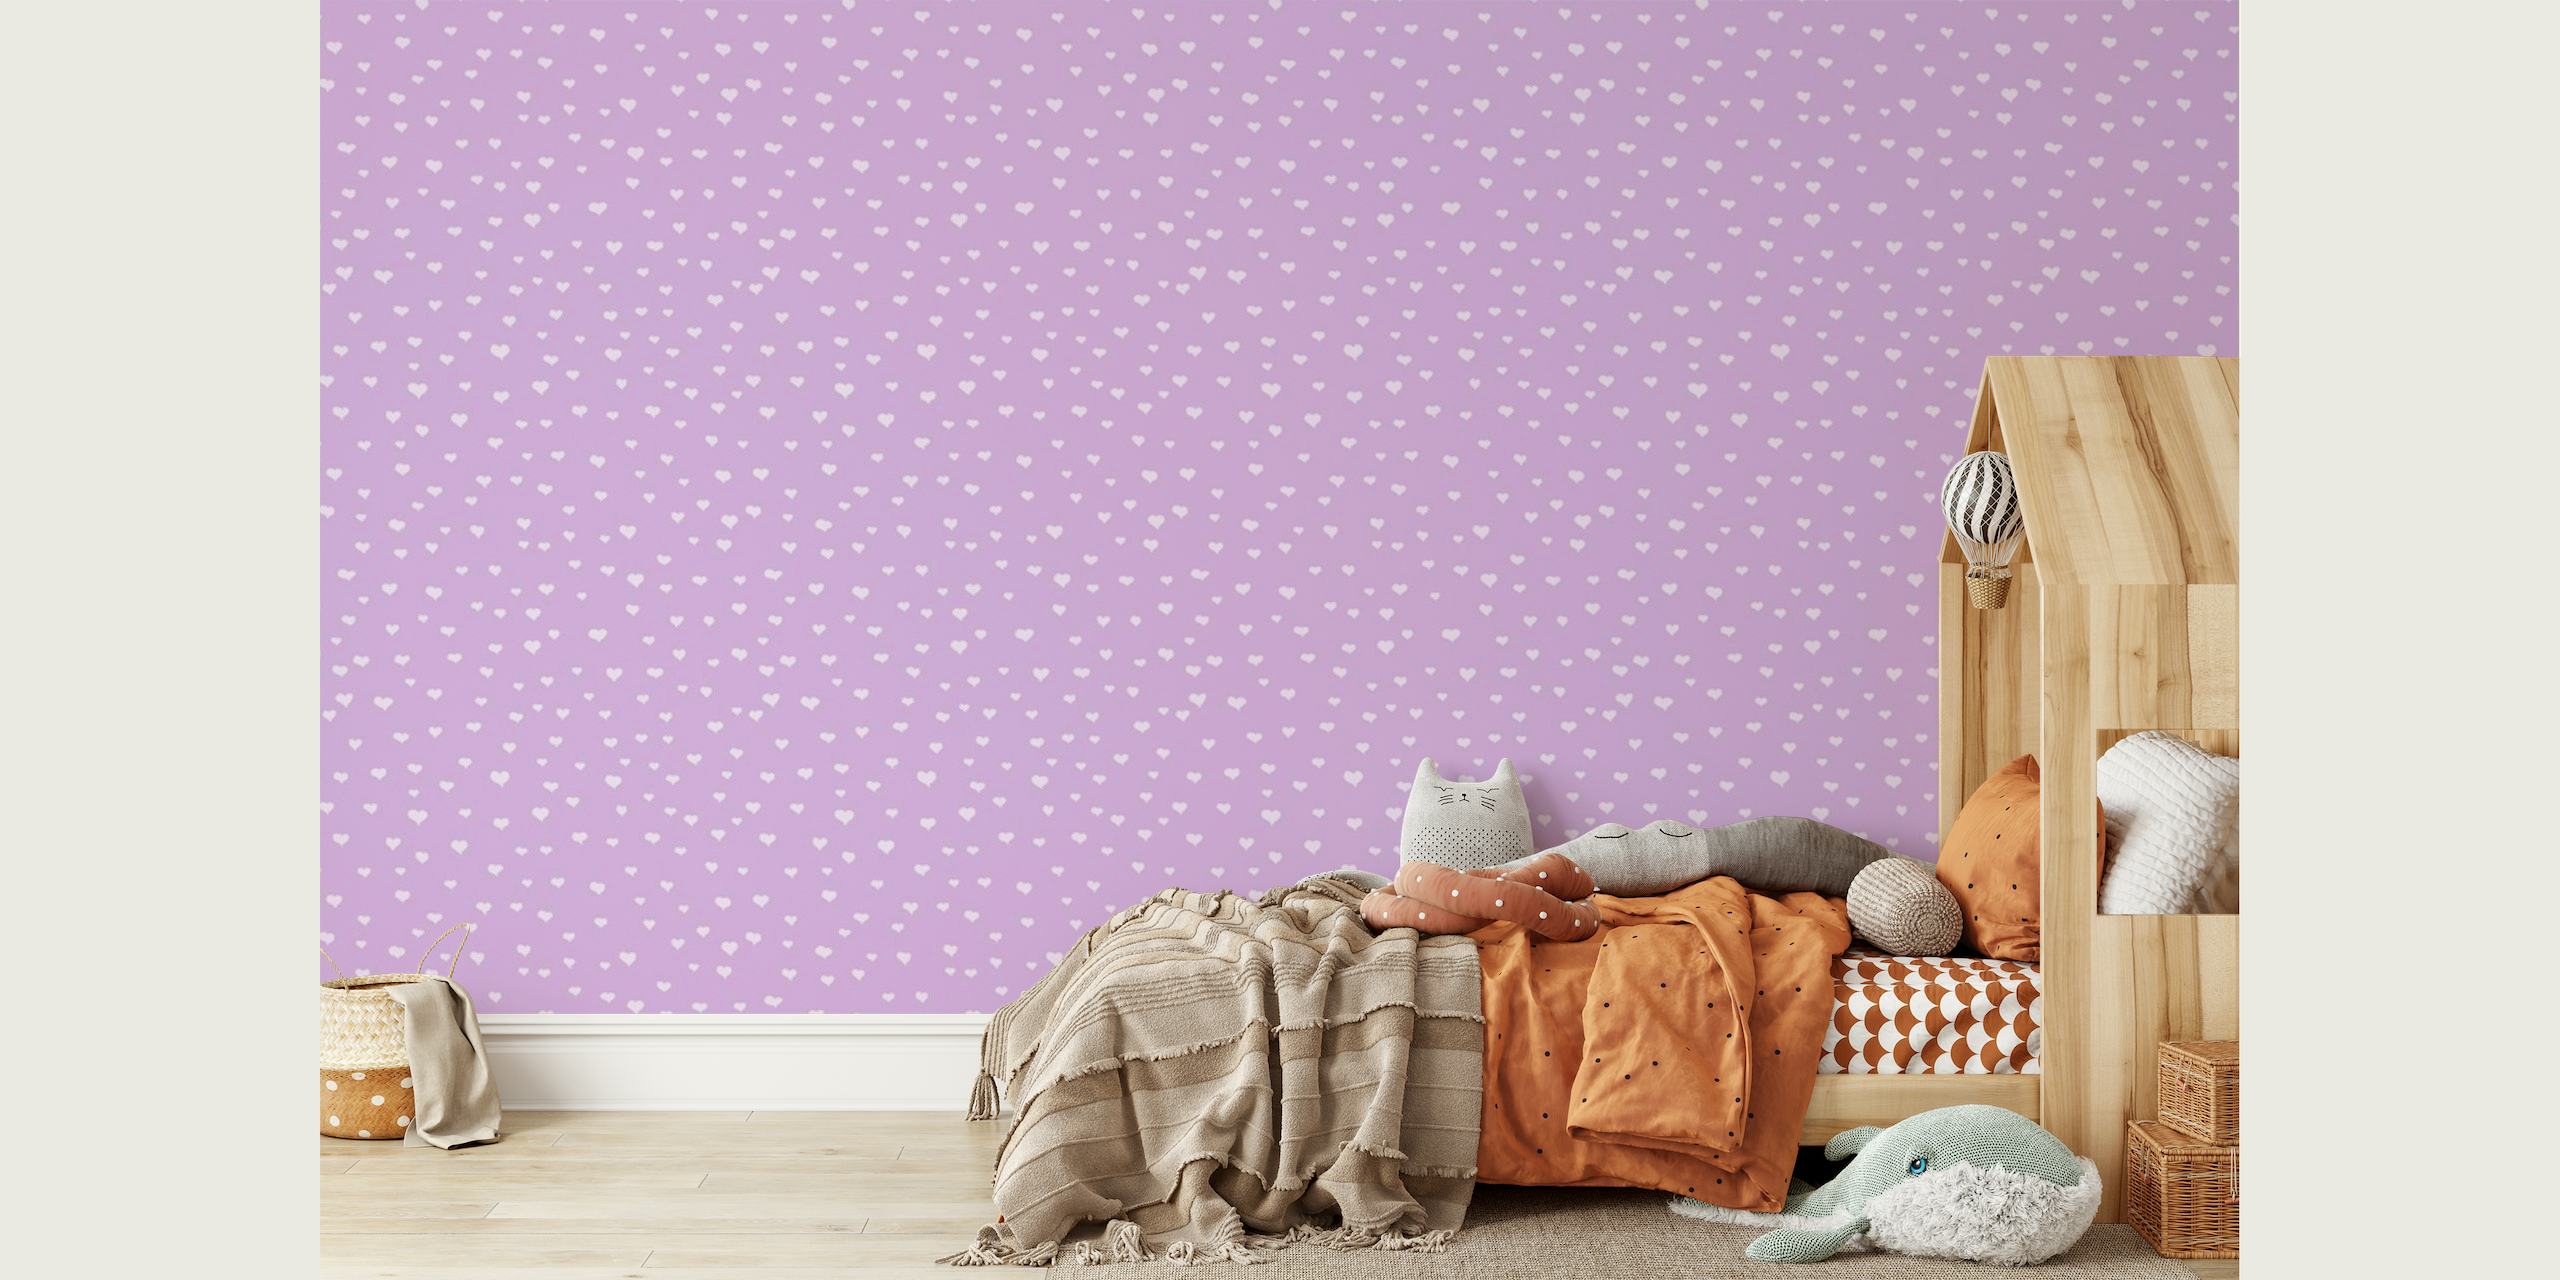 Hand-drawn hearts wall mural in lavender hue